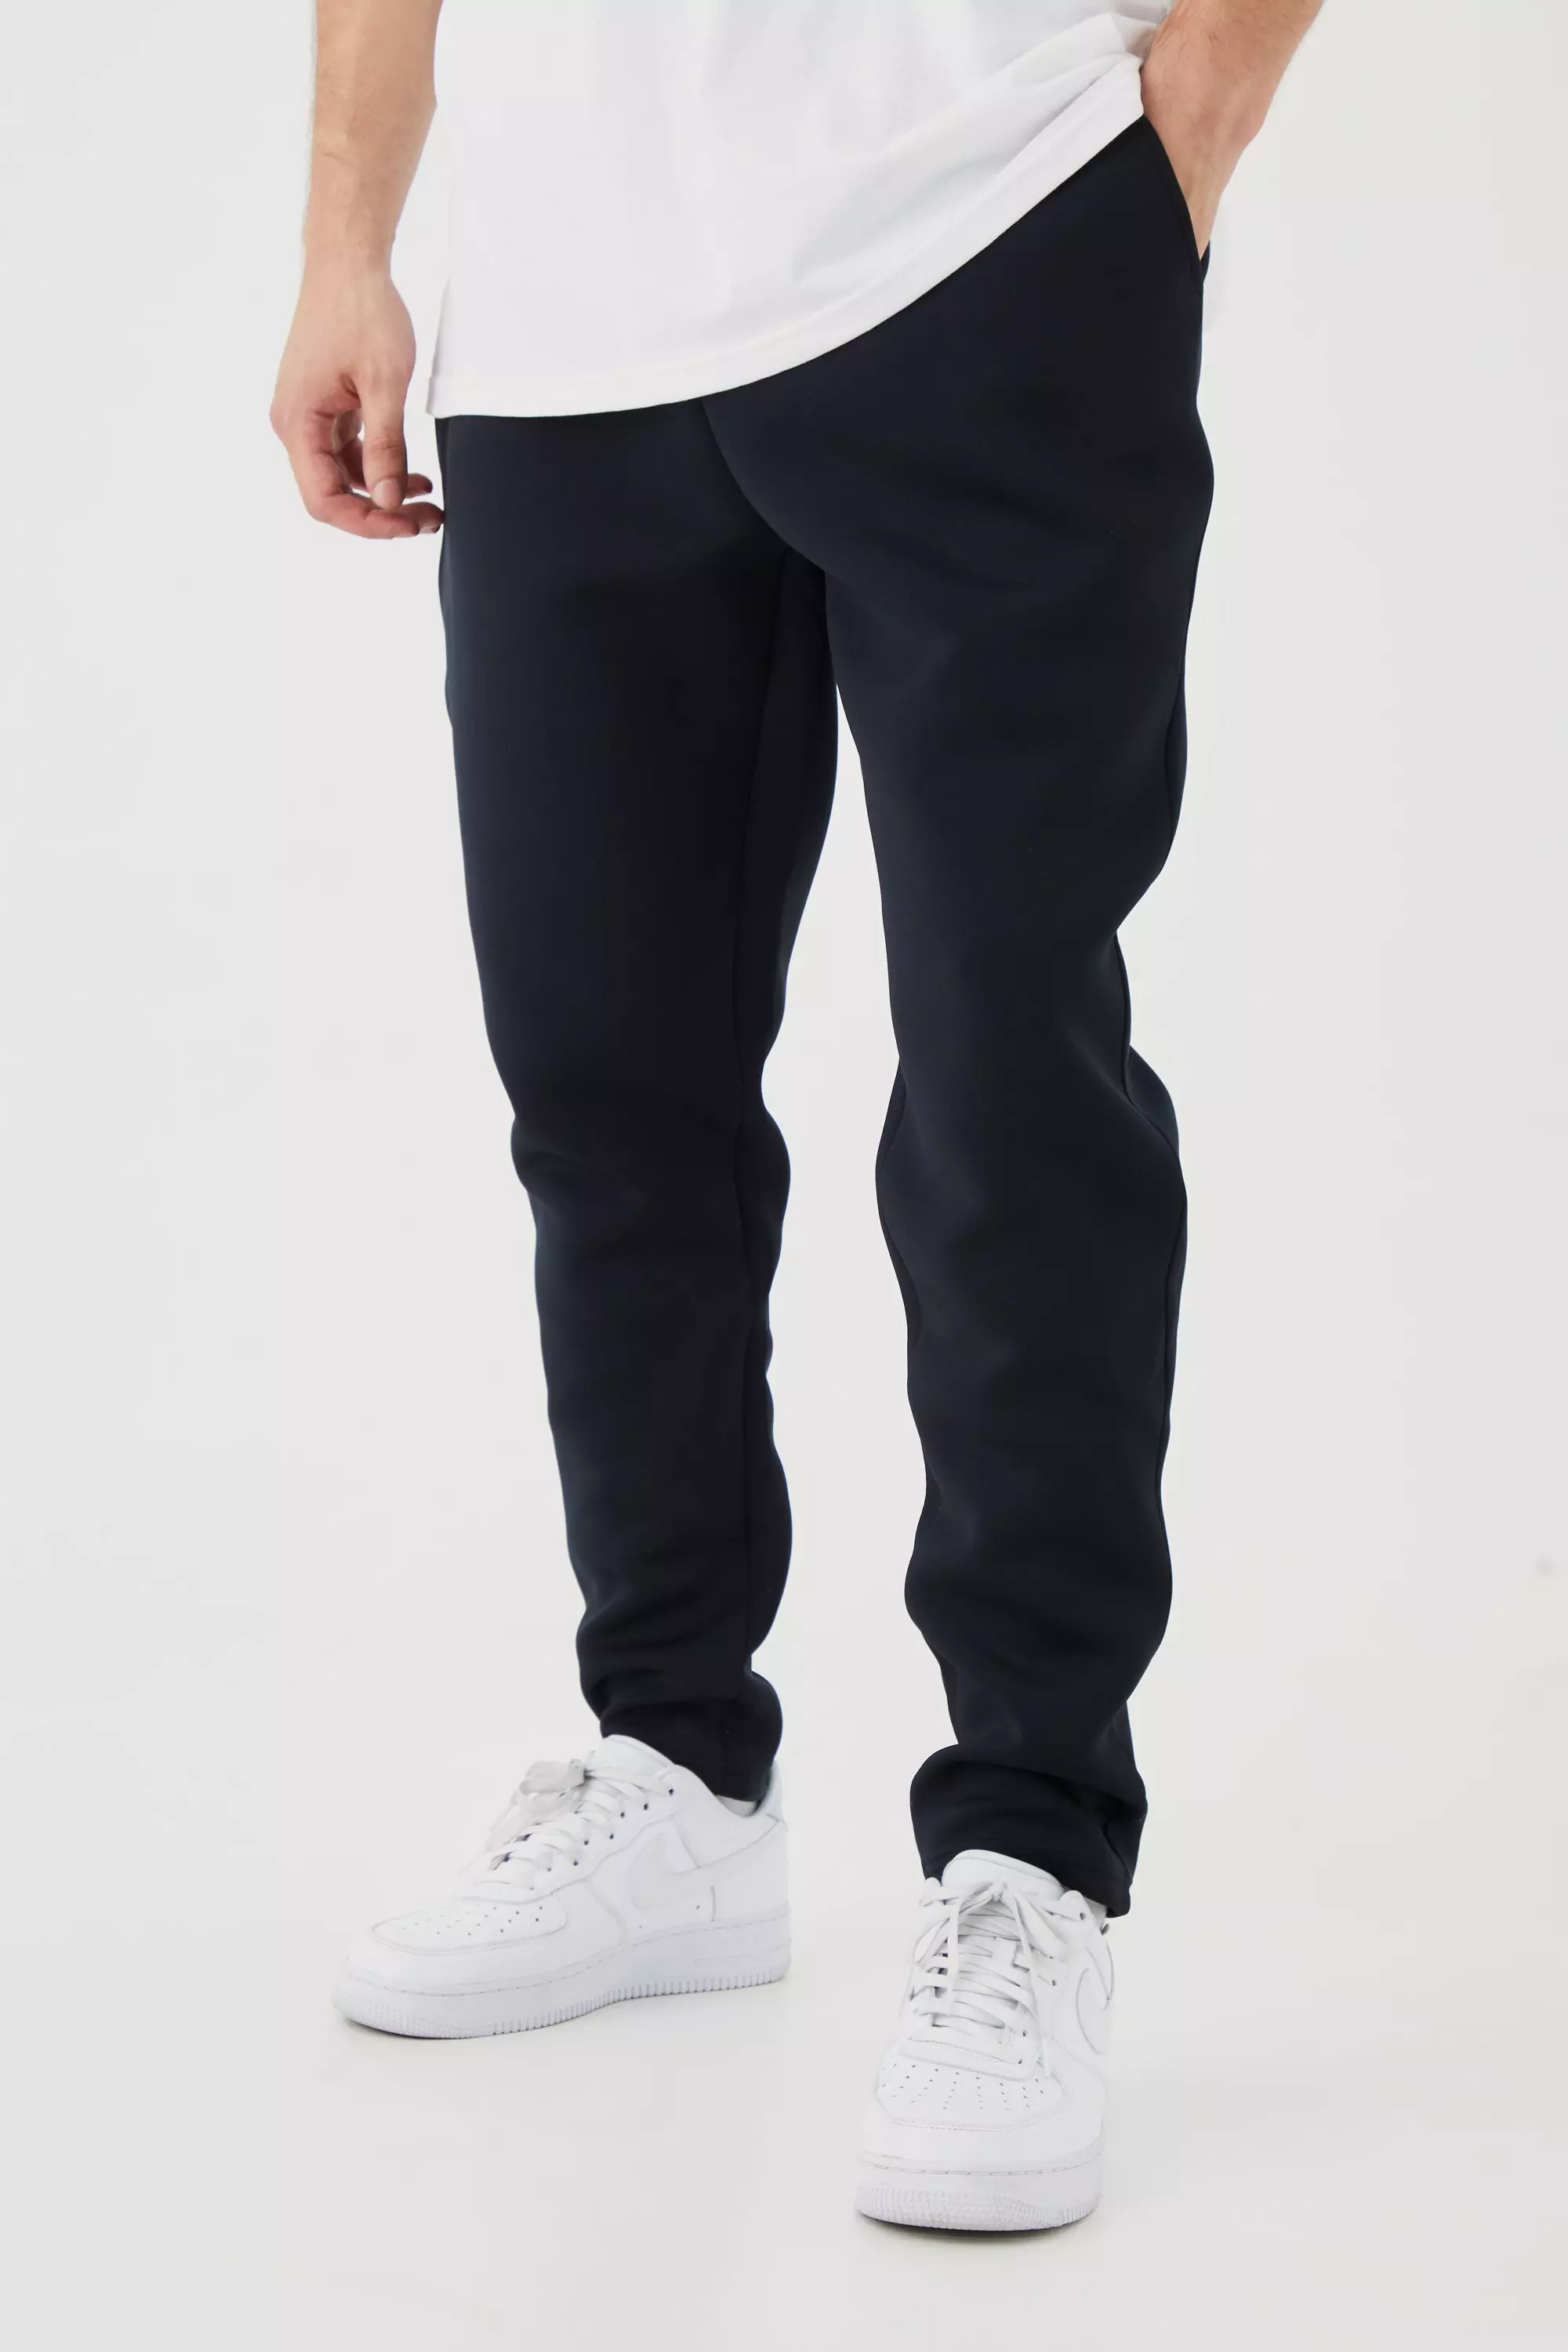 Tall Slim Tapered Cropped Bonded Scuba Sweatpants Black